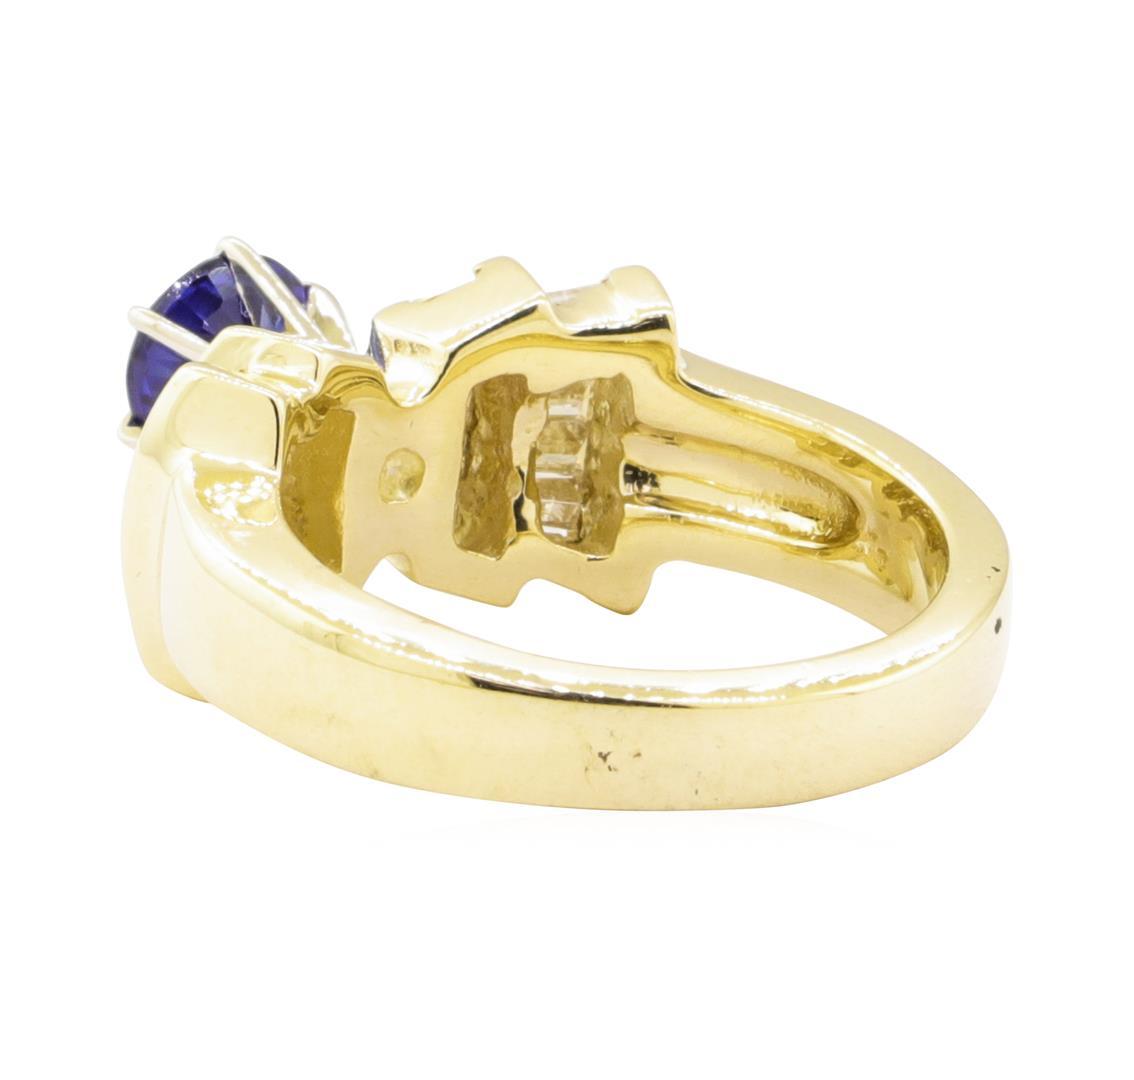 1.66 ctw Blue Sapphire And Diamond Ring - 14KT Yellow Gold